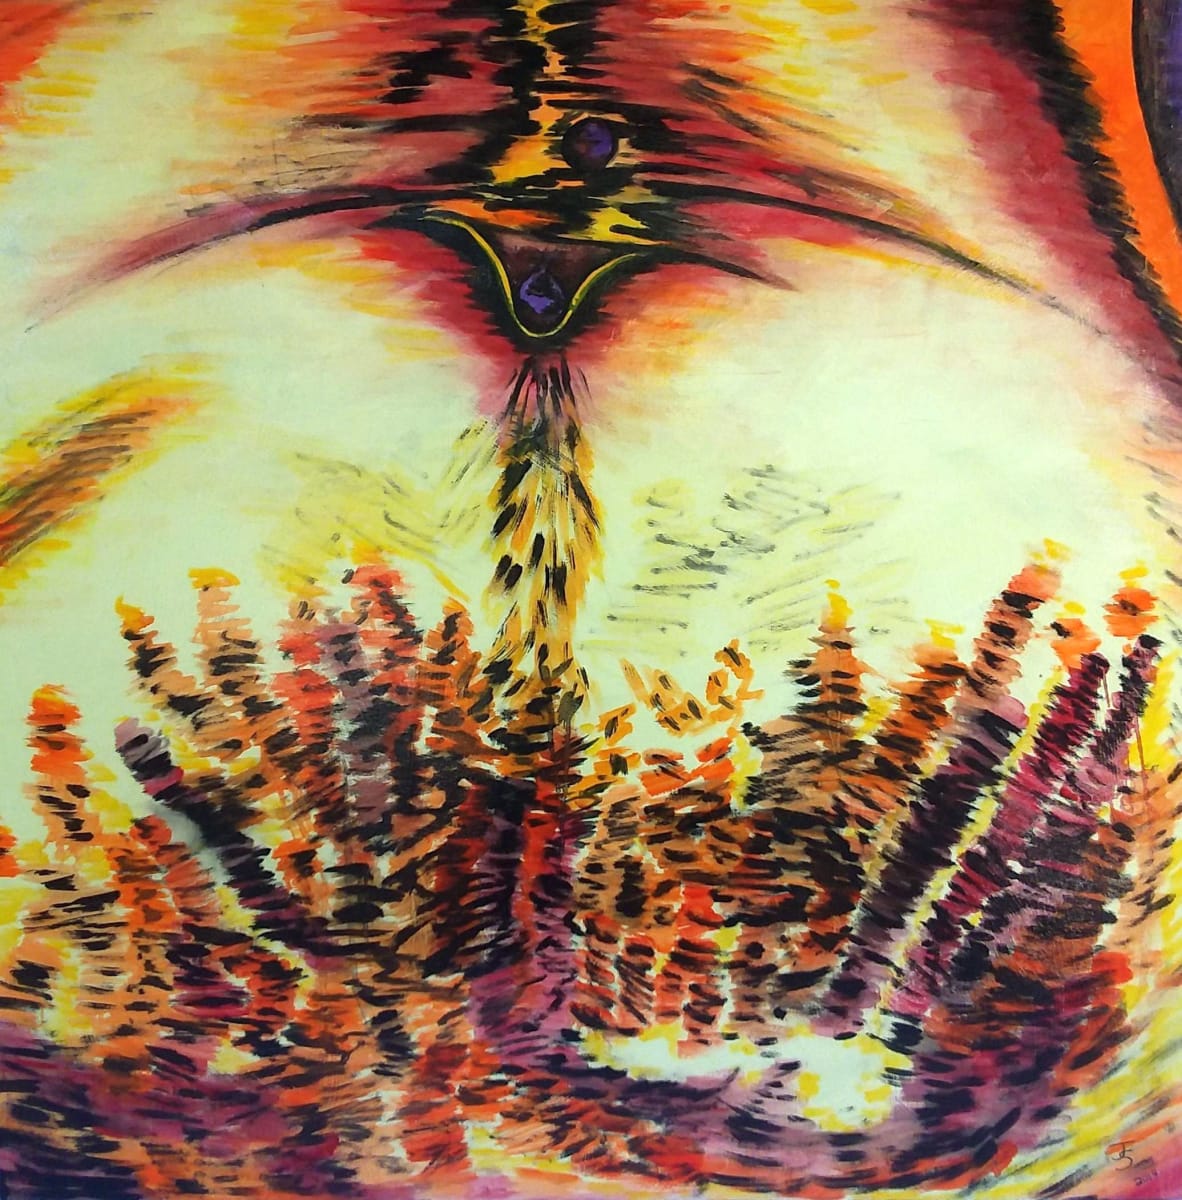 Life Through Fire by Joanne Stowell Artwork  Image: Life Through Fire